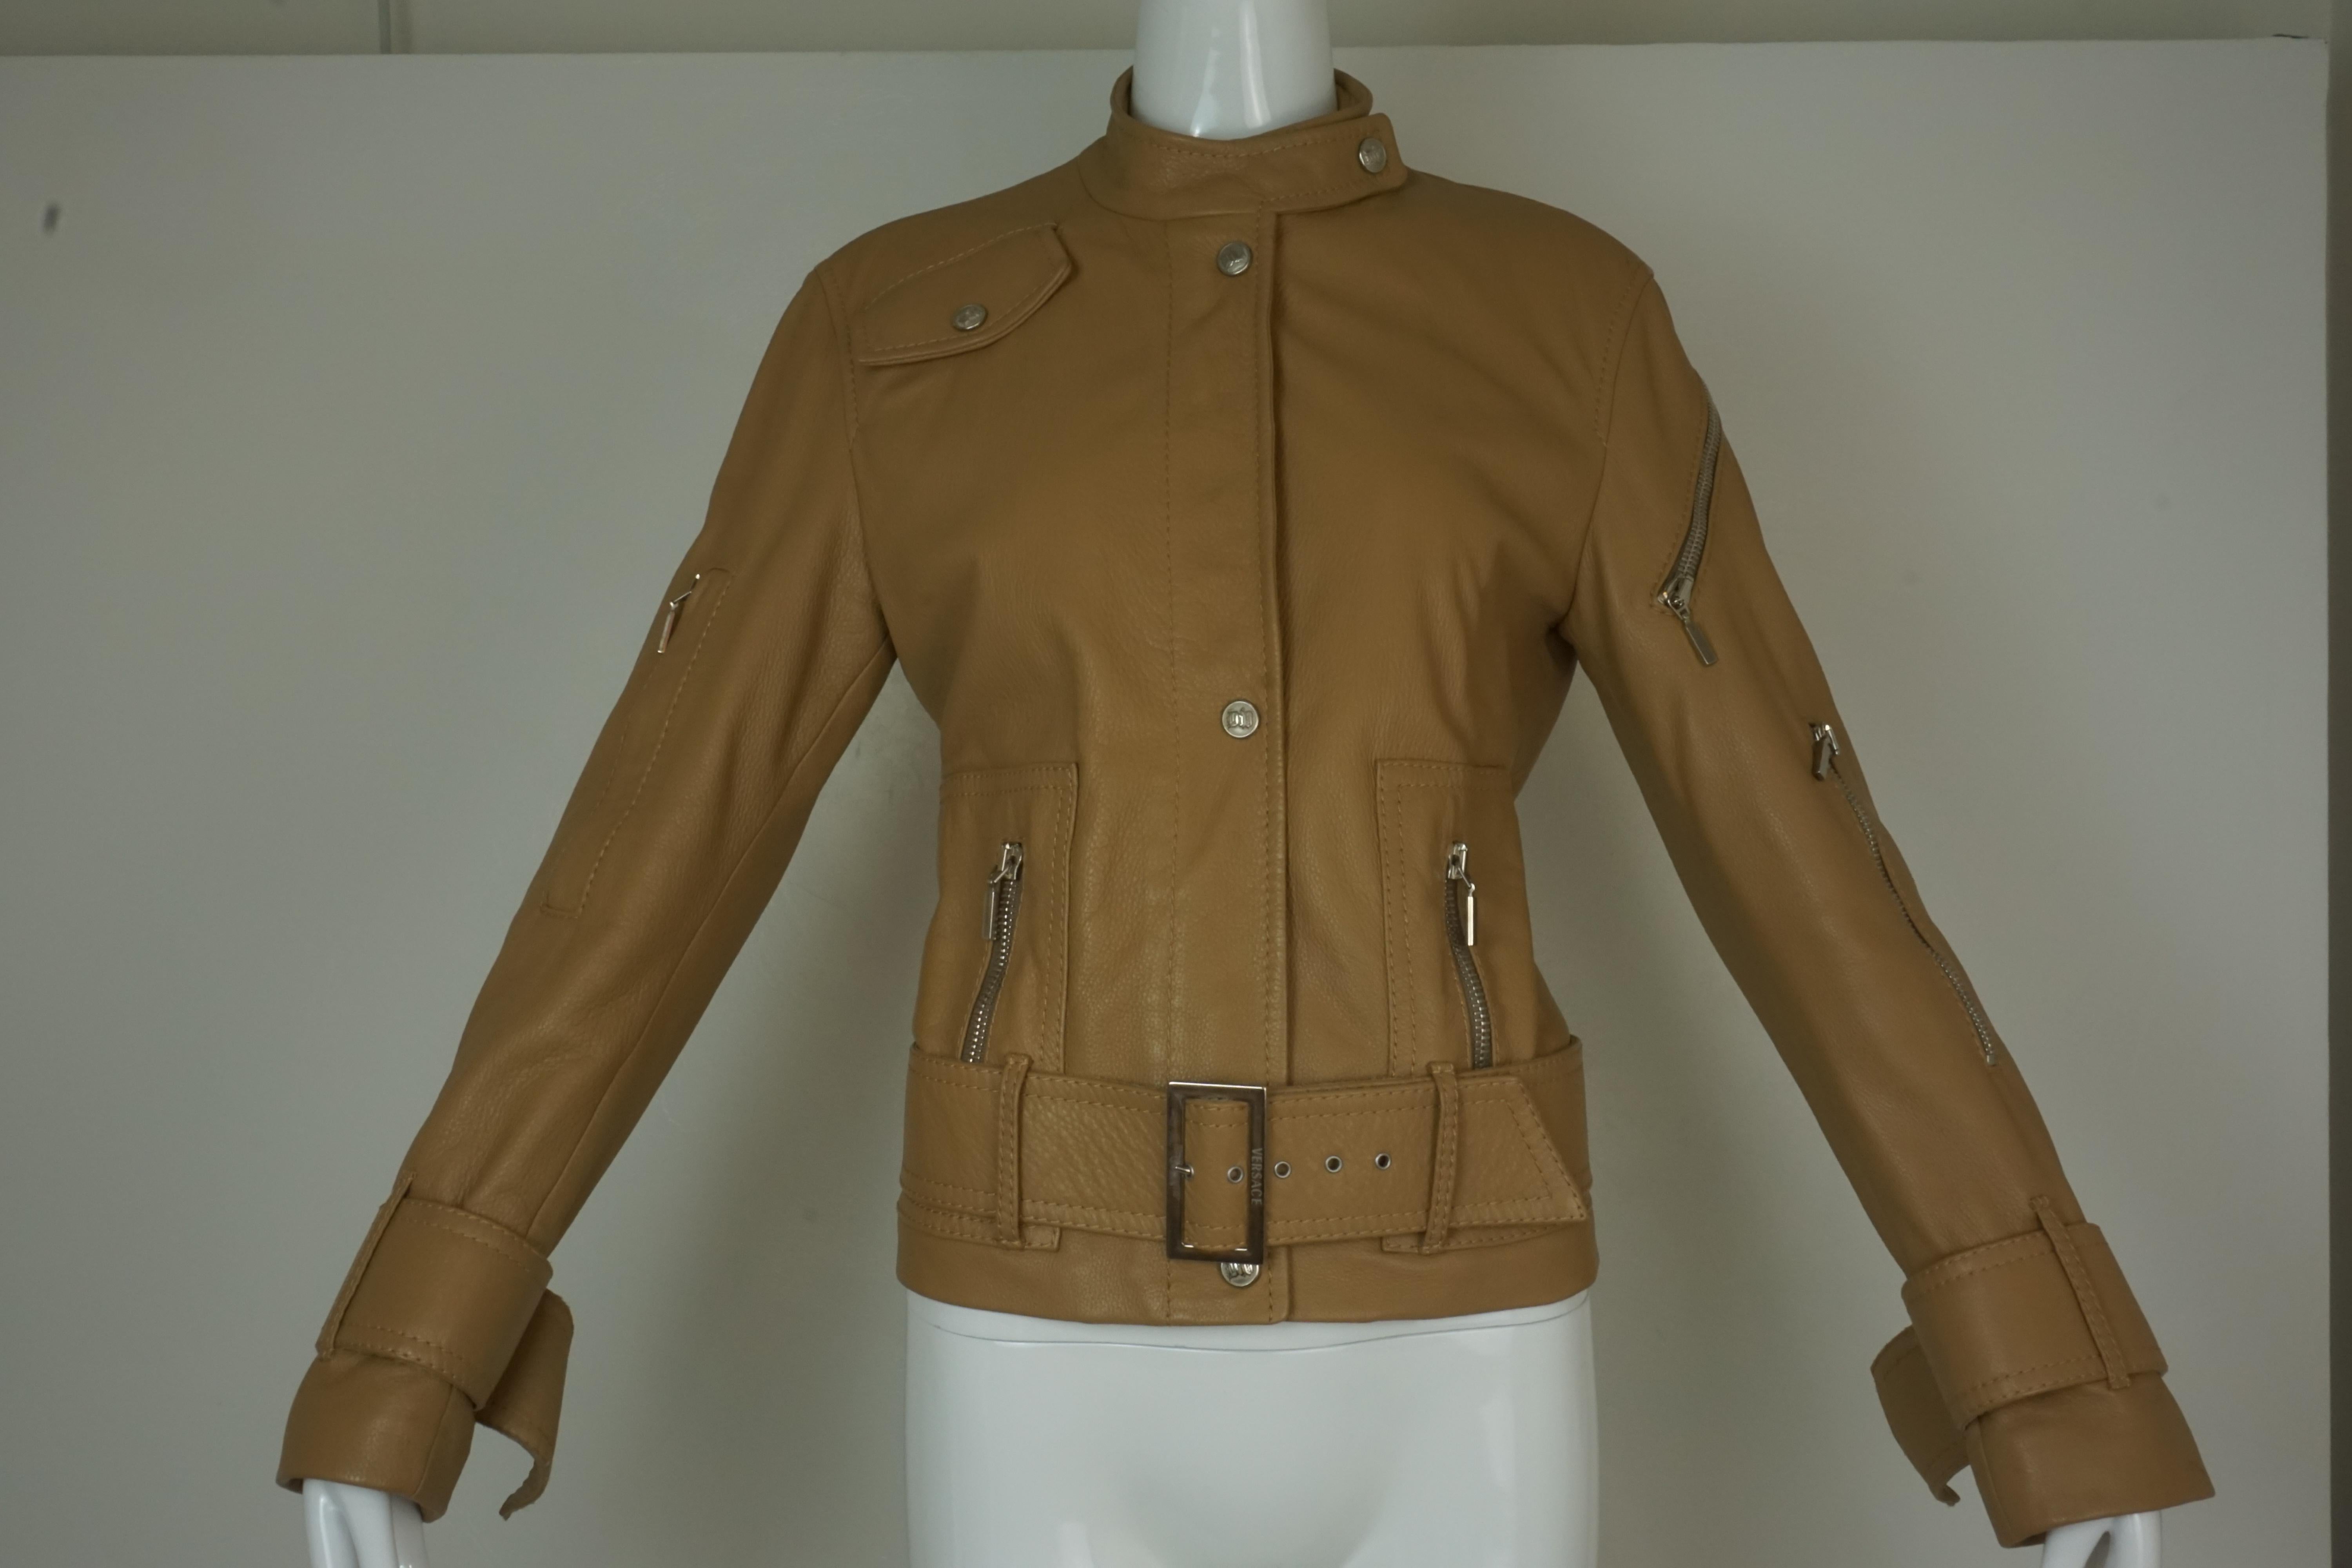 Versace Studded Light Brown Leather Motorcycle Jacket. Classic motorcycle zipper and belting. Buckles at cuffs. Rayon lining. Size 6,  38